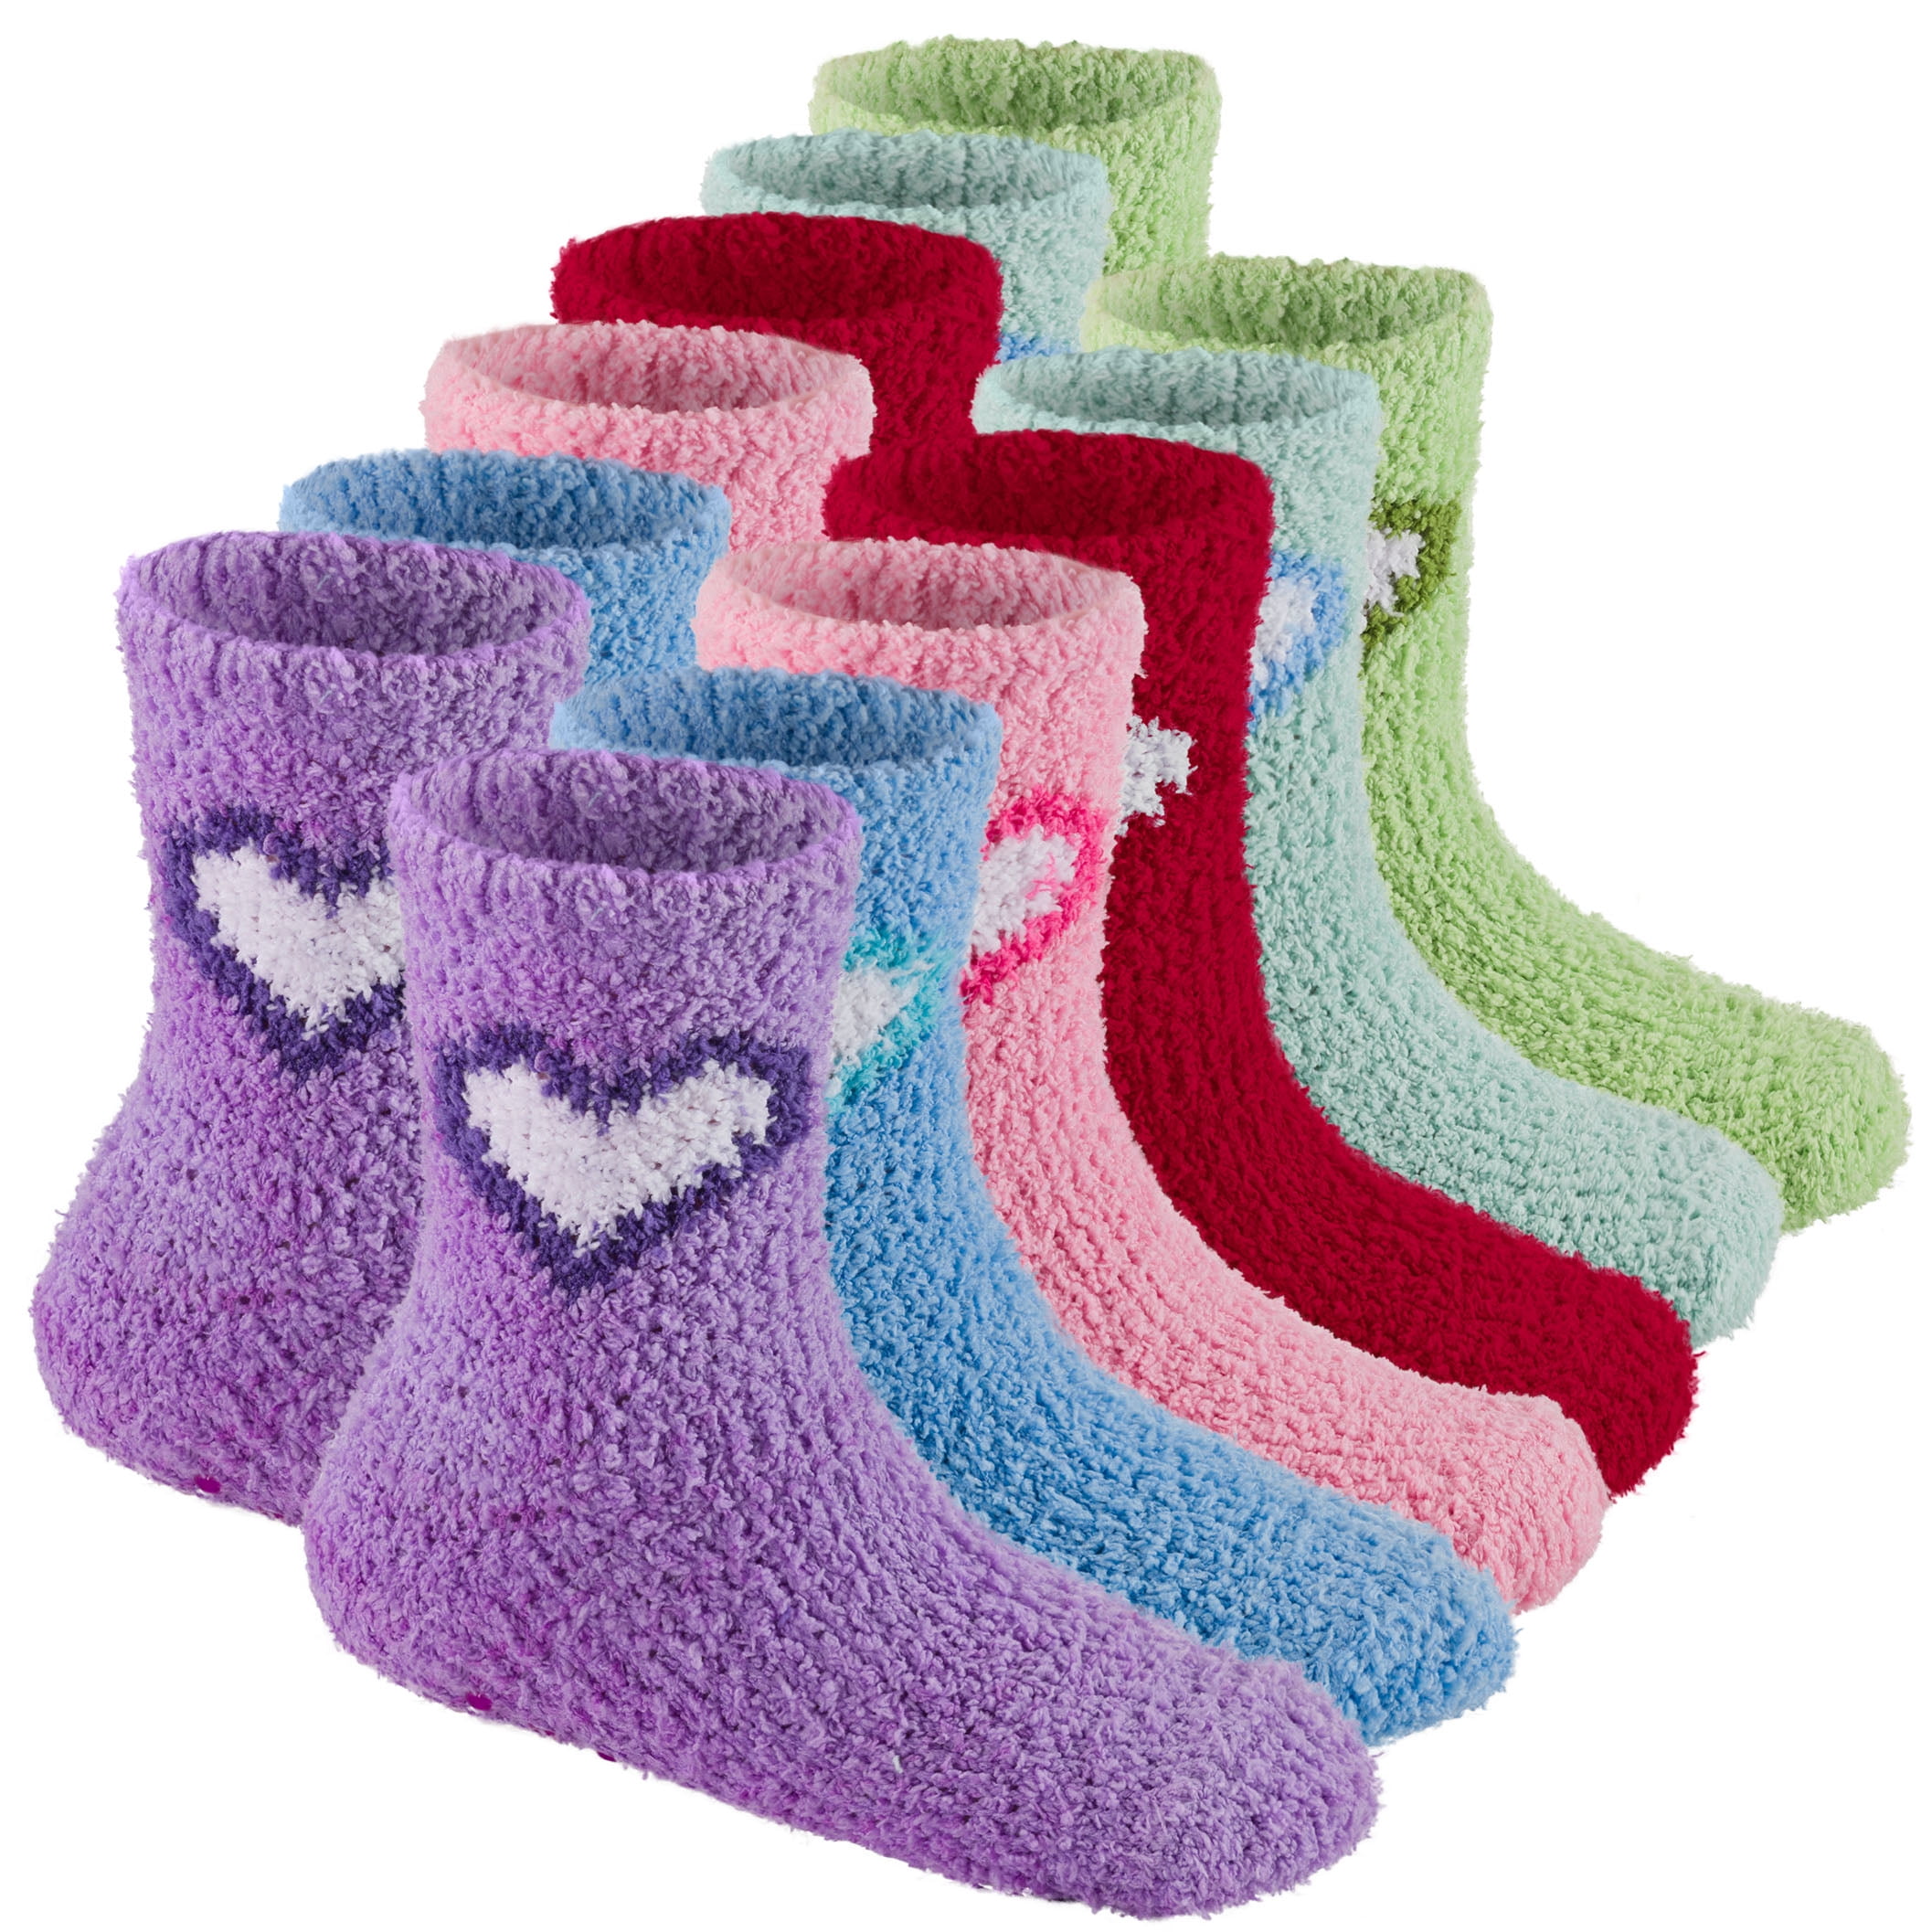 6 Pairs Warm Fuzzy Socks for Kids with Grippers - Non Skid Slipper Socks for Toddlers - Solid Hearts 2-4 Yr Debra Weitzner - image 1 of 5